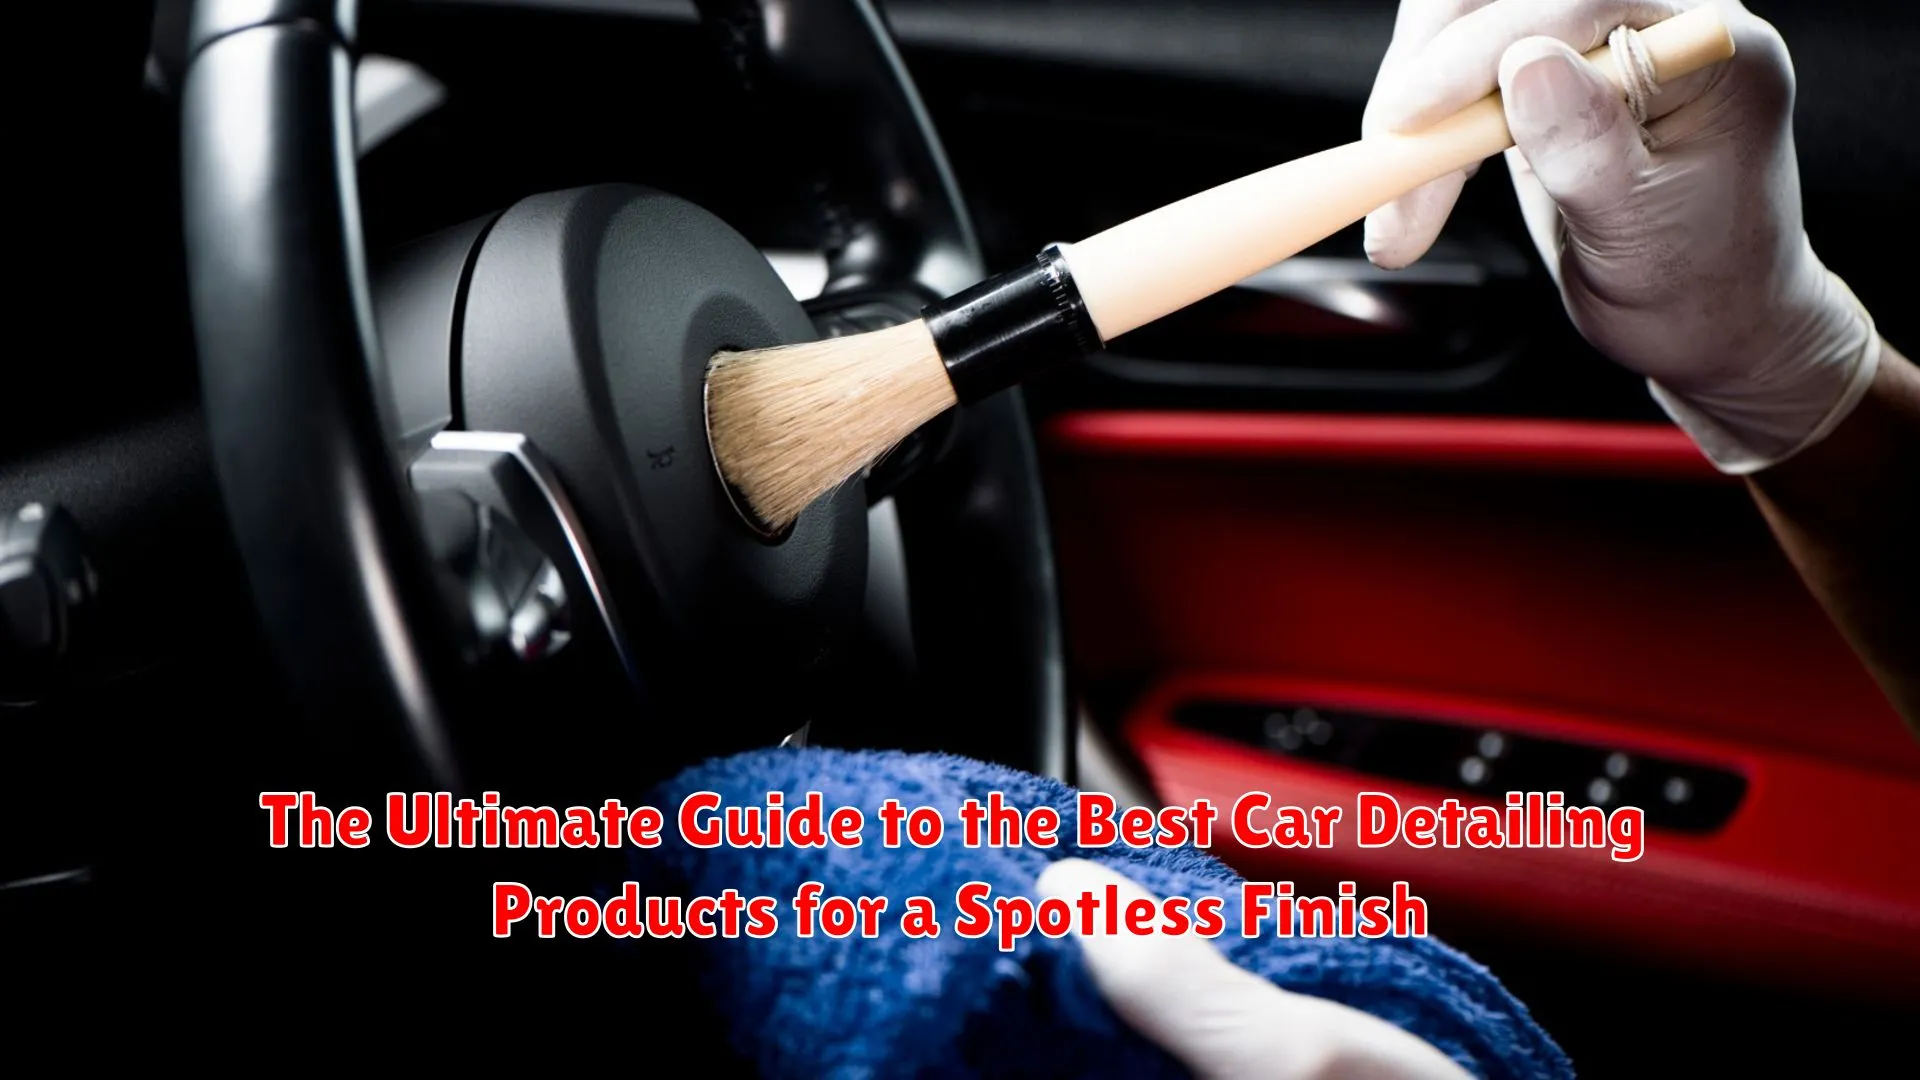 The Ultimate Guide to the Best Car Detailing Products for a Spotless Finish